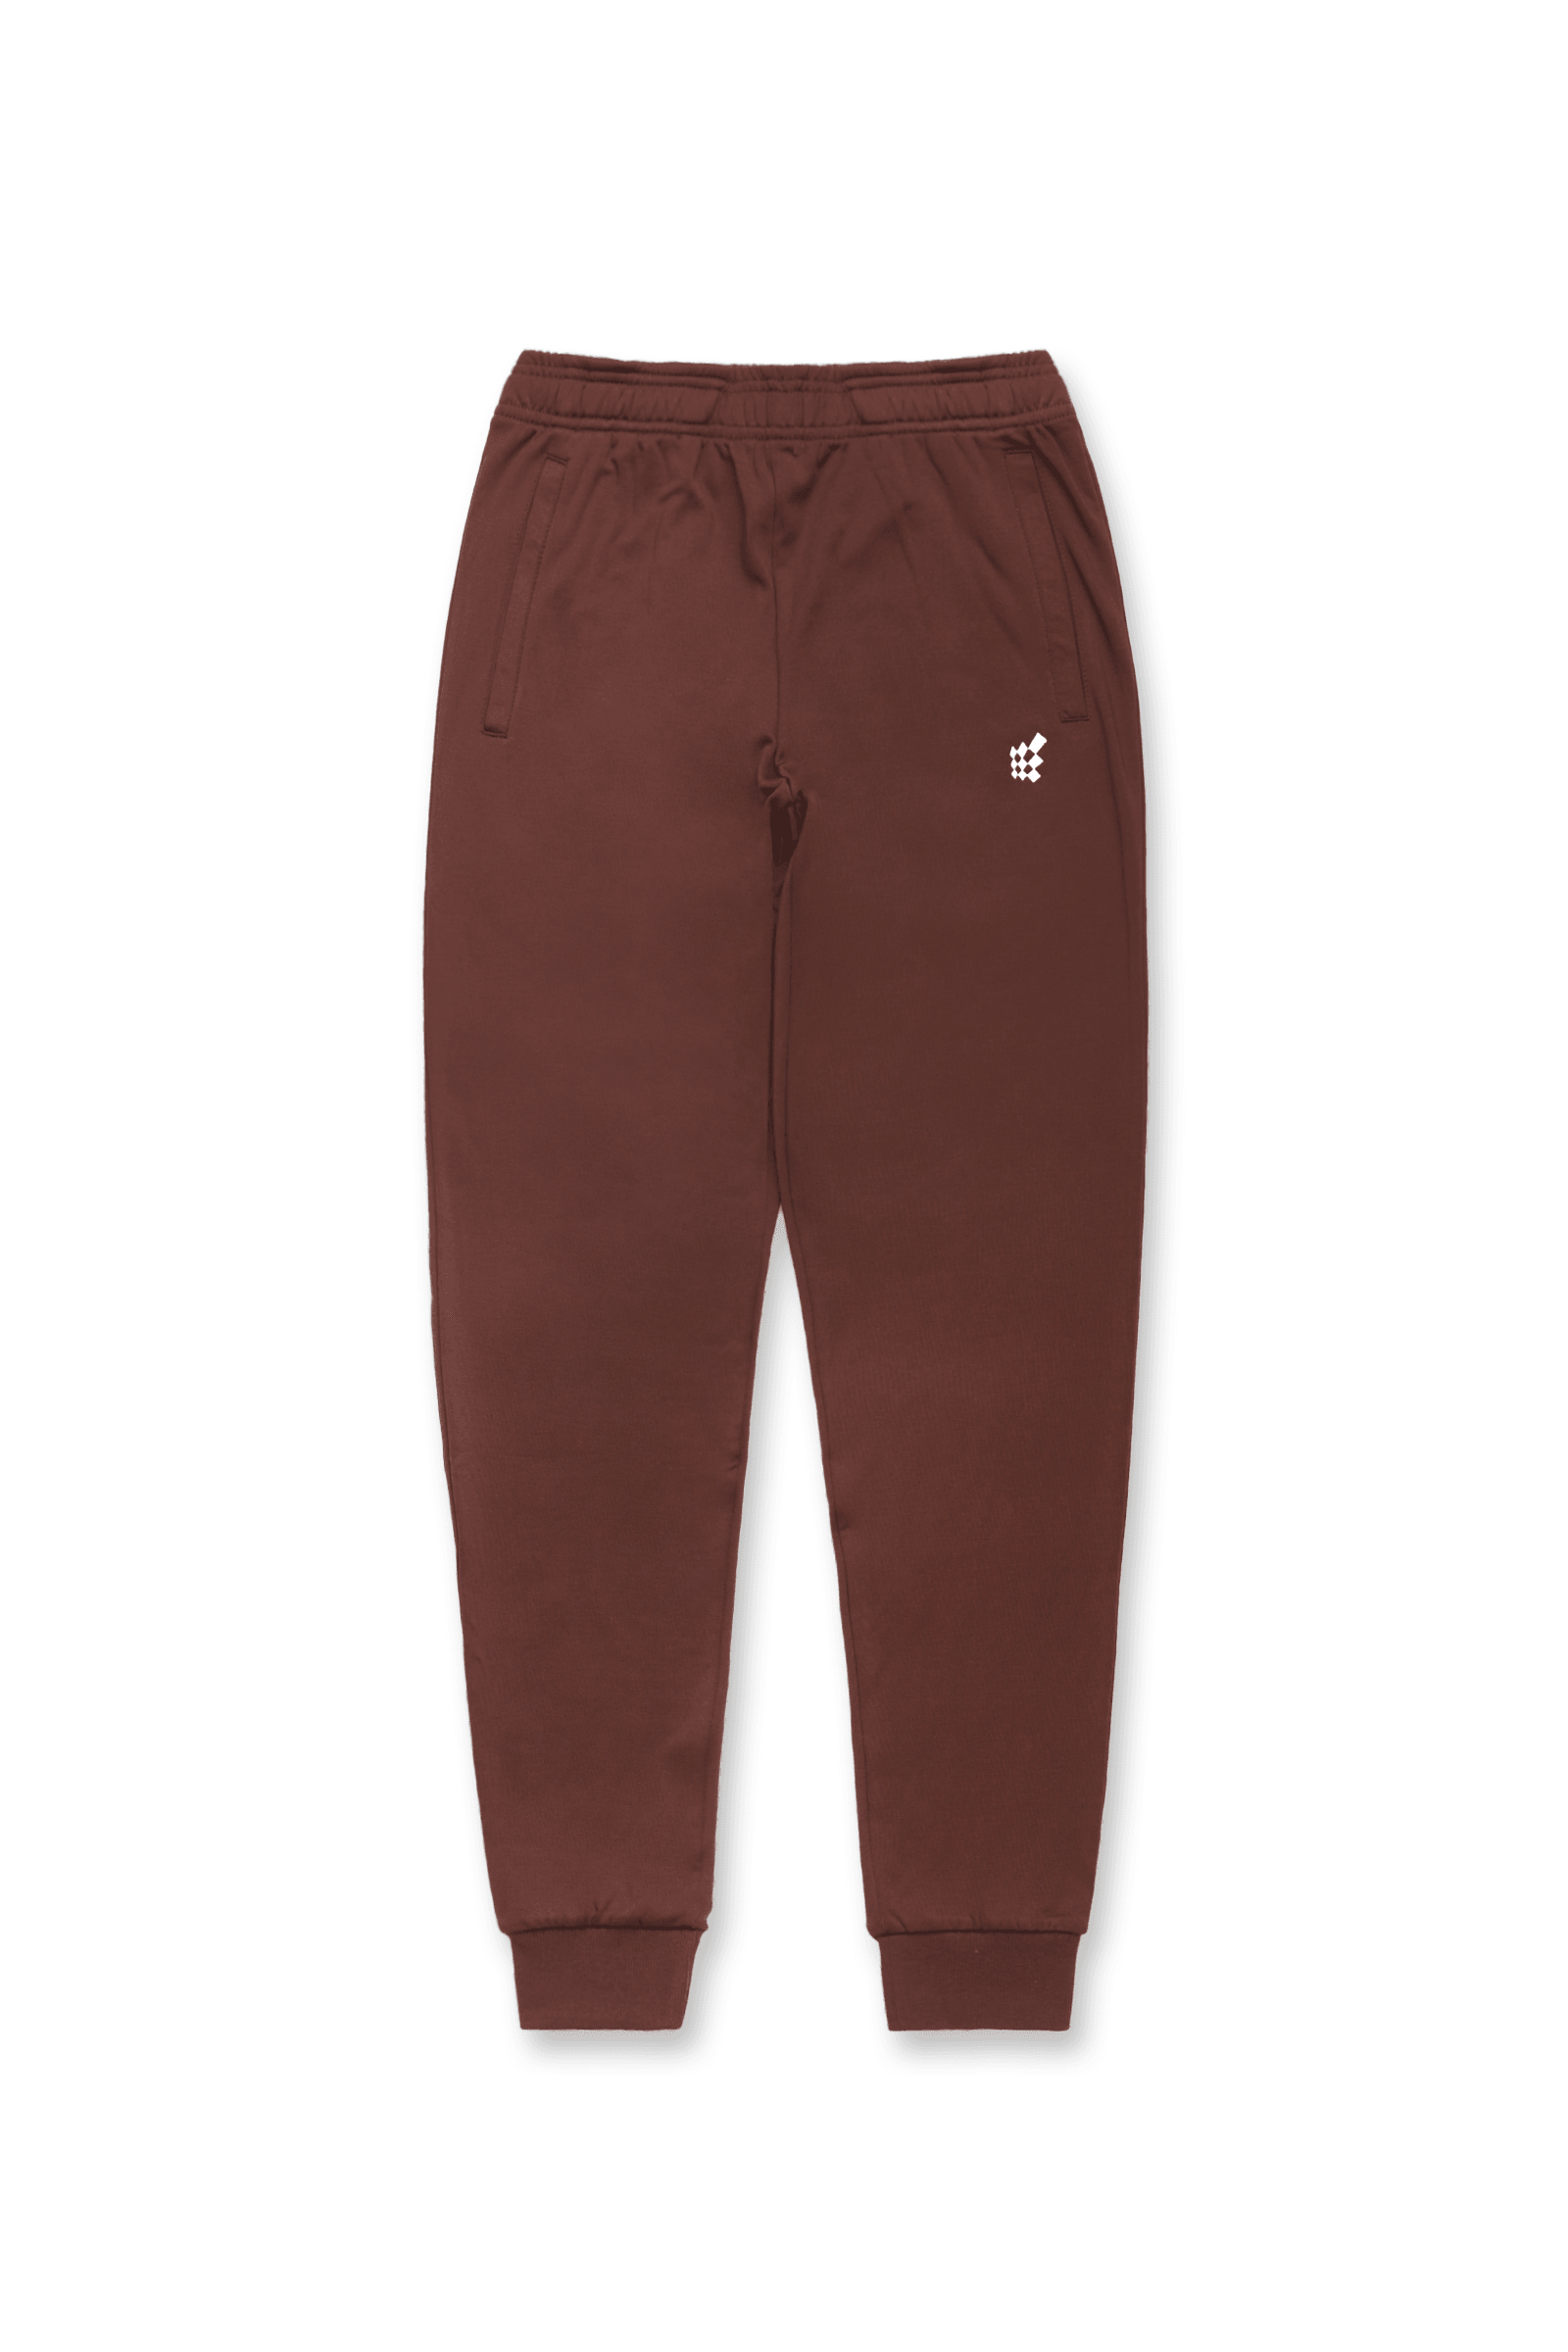 Tapered Sweatpants for Women